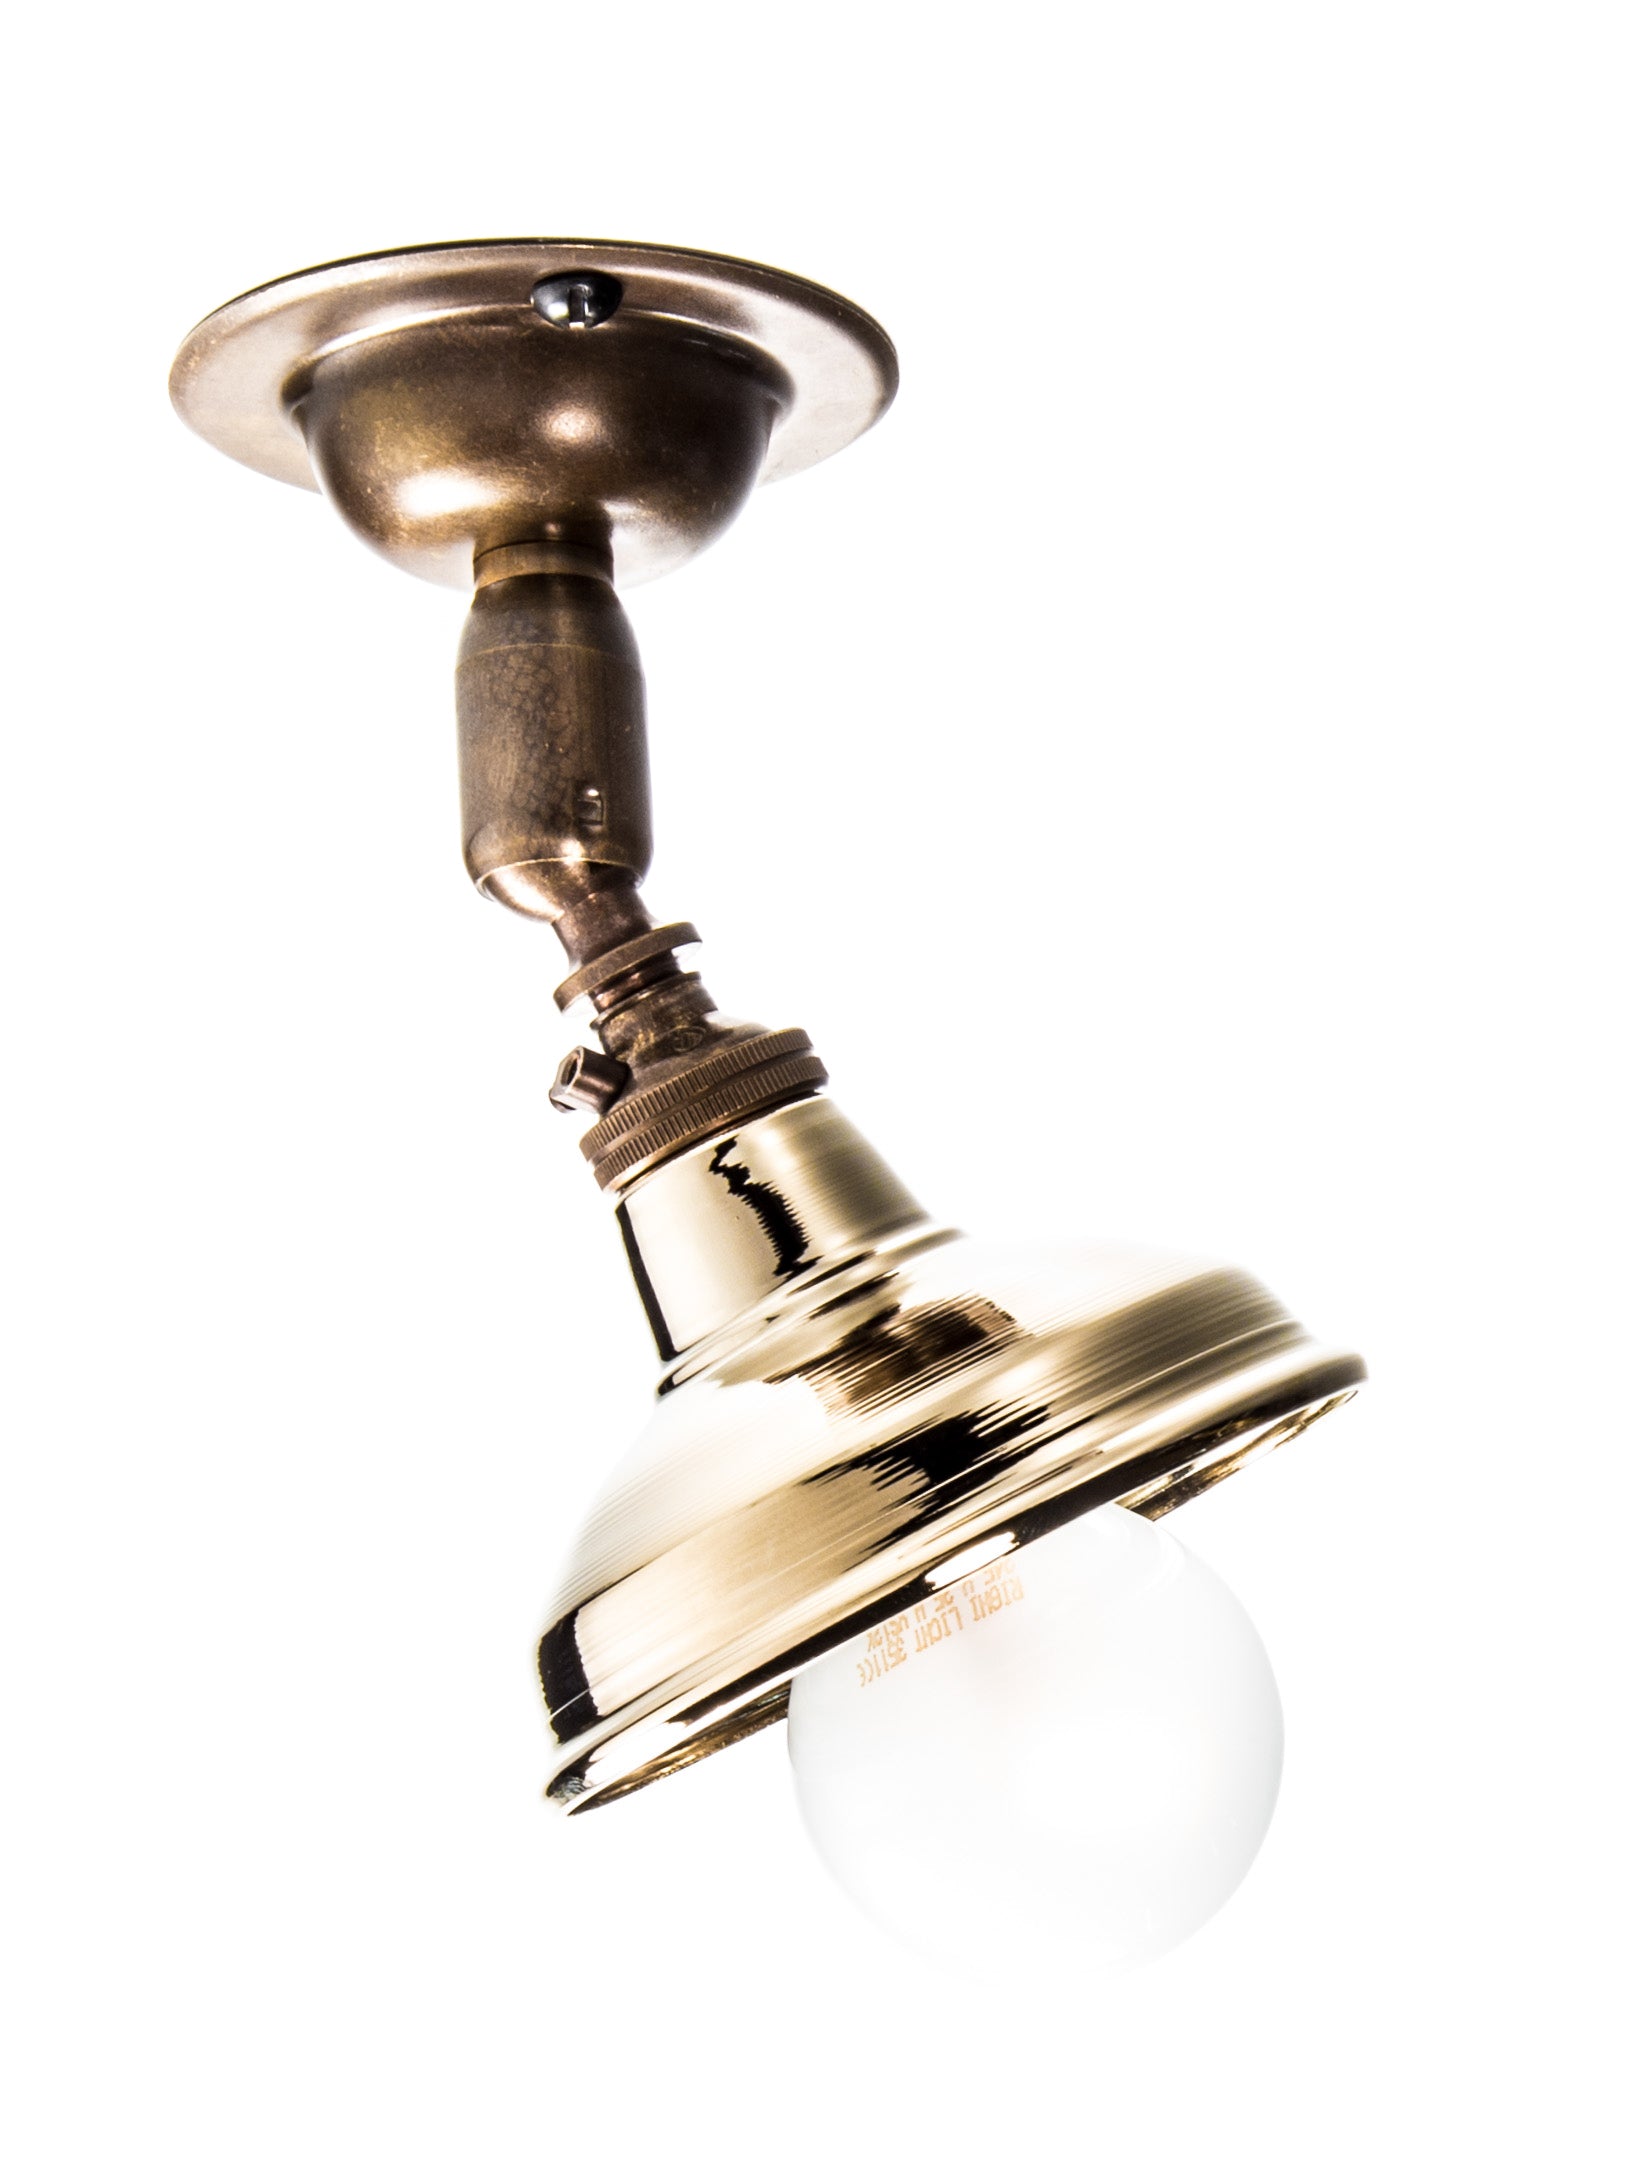 Vintage Brass Maria Spotlight | Ceiling Light With Gold Shade | End-Of-Line